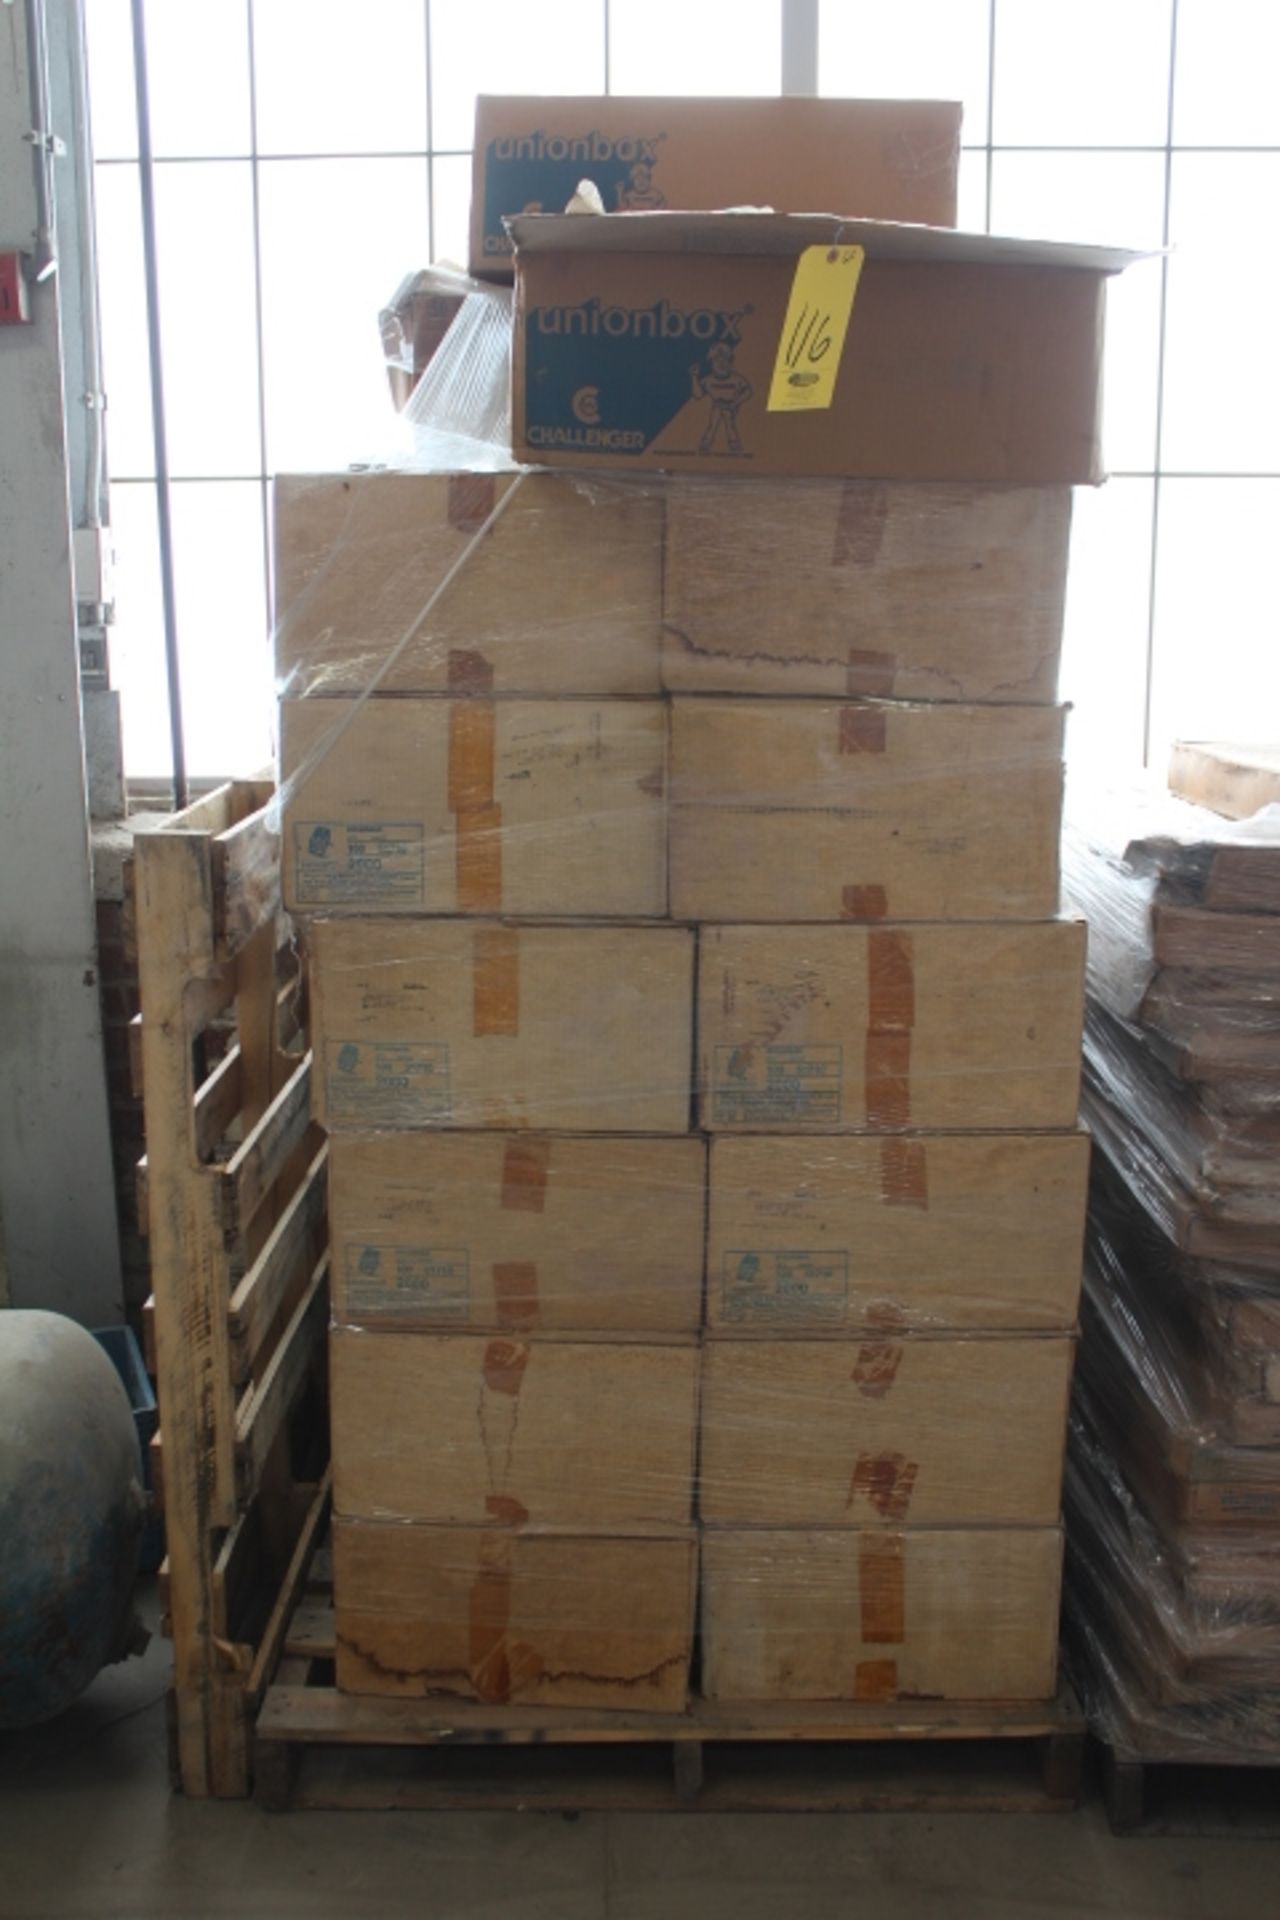 APPROX 2,400+ SYLVANIA SINGLE GANG SWITCH AND RECEPTACLE BOXES